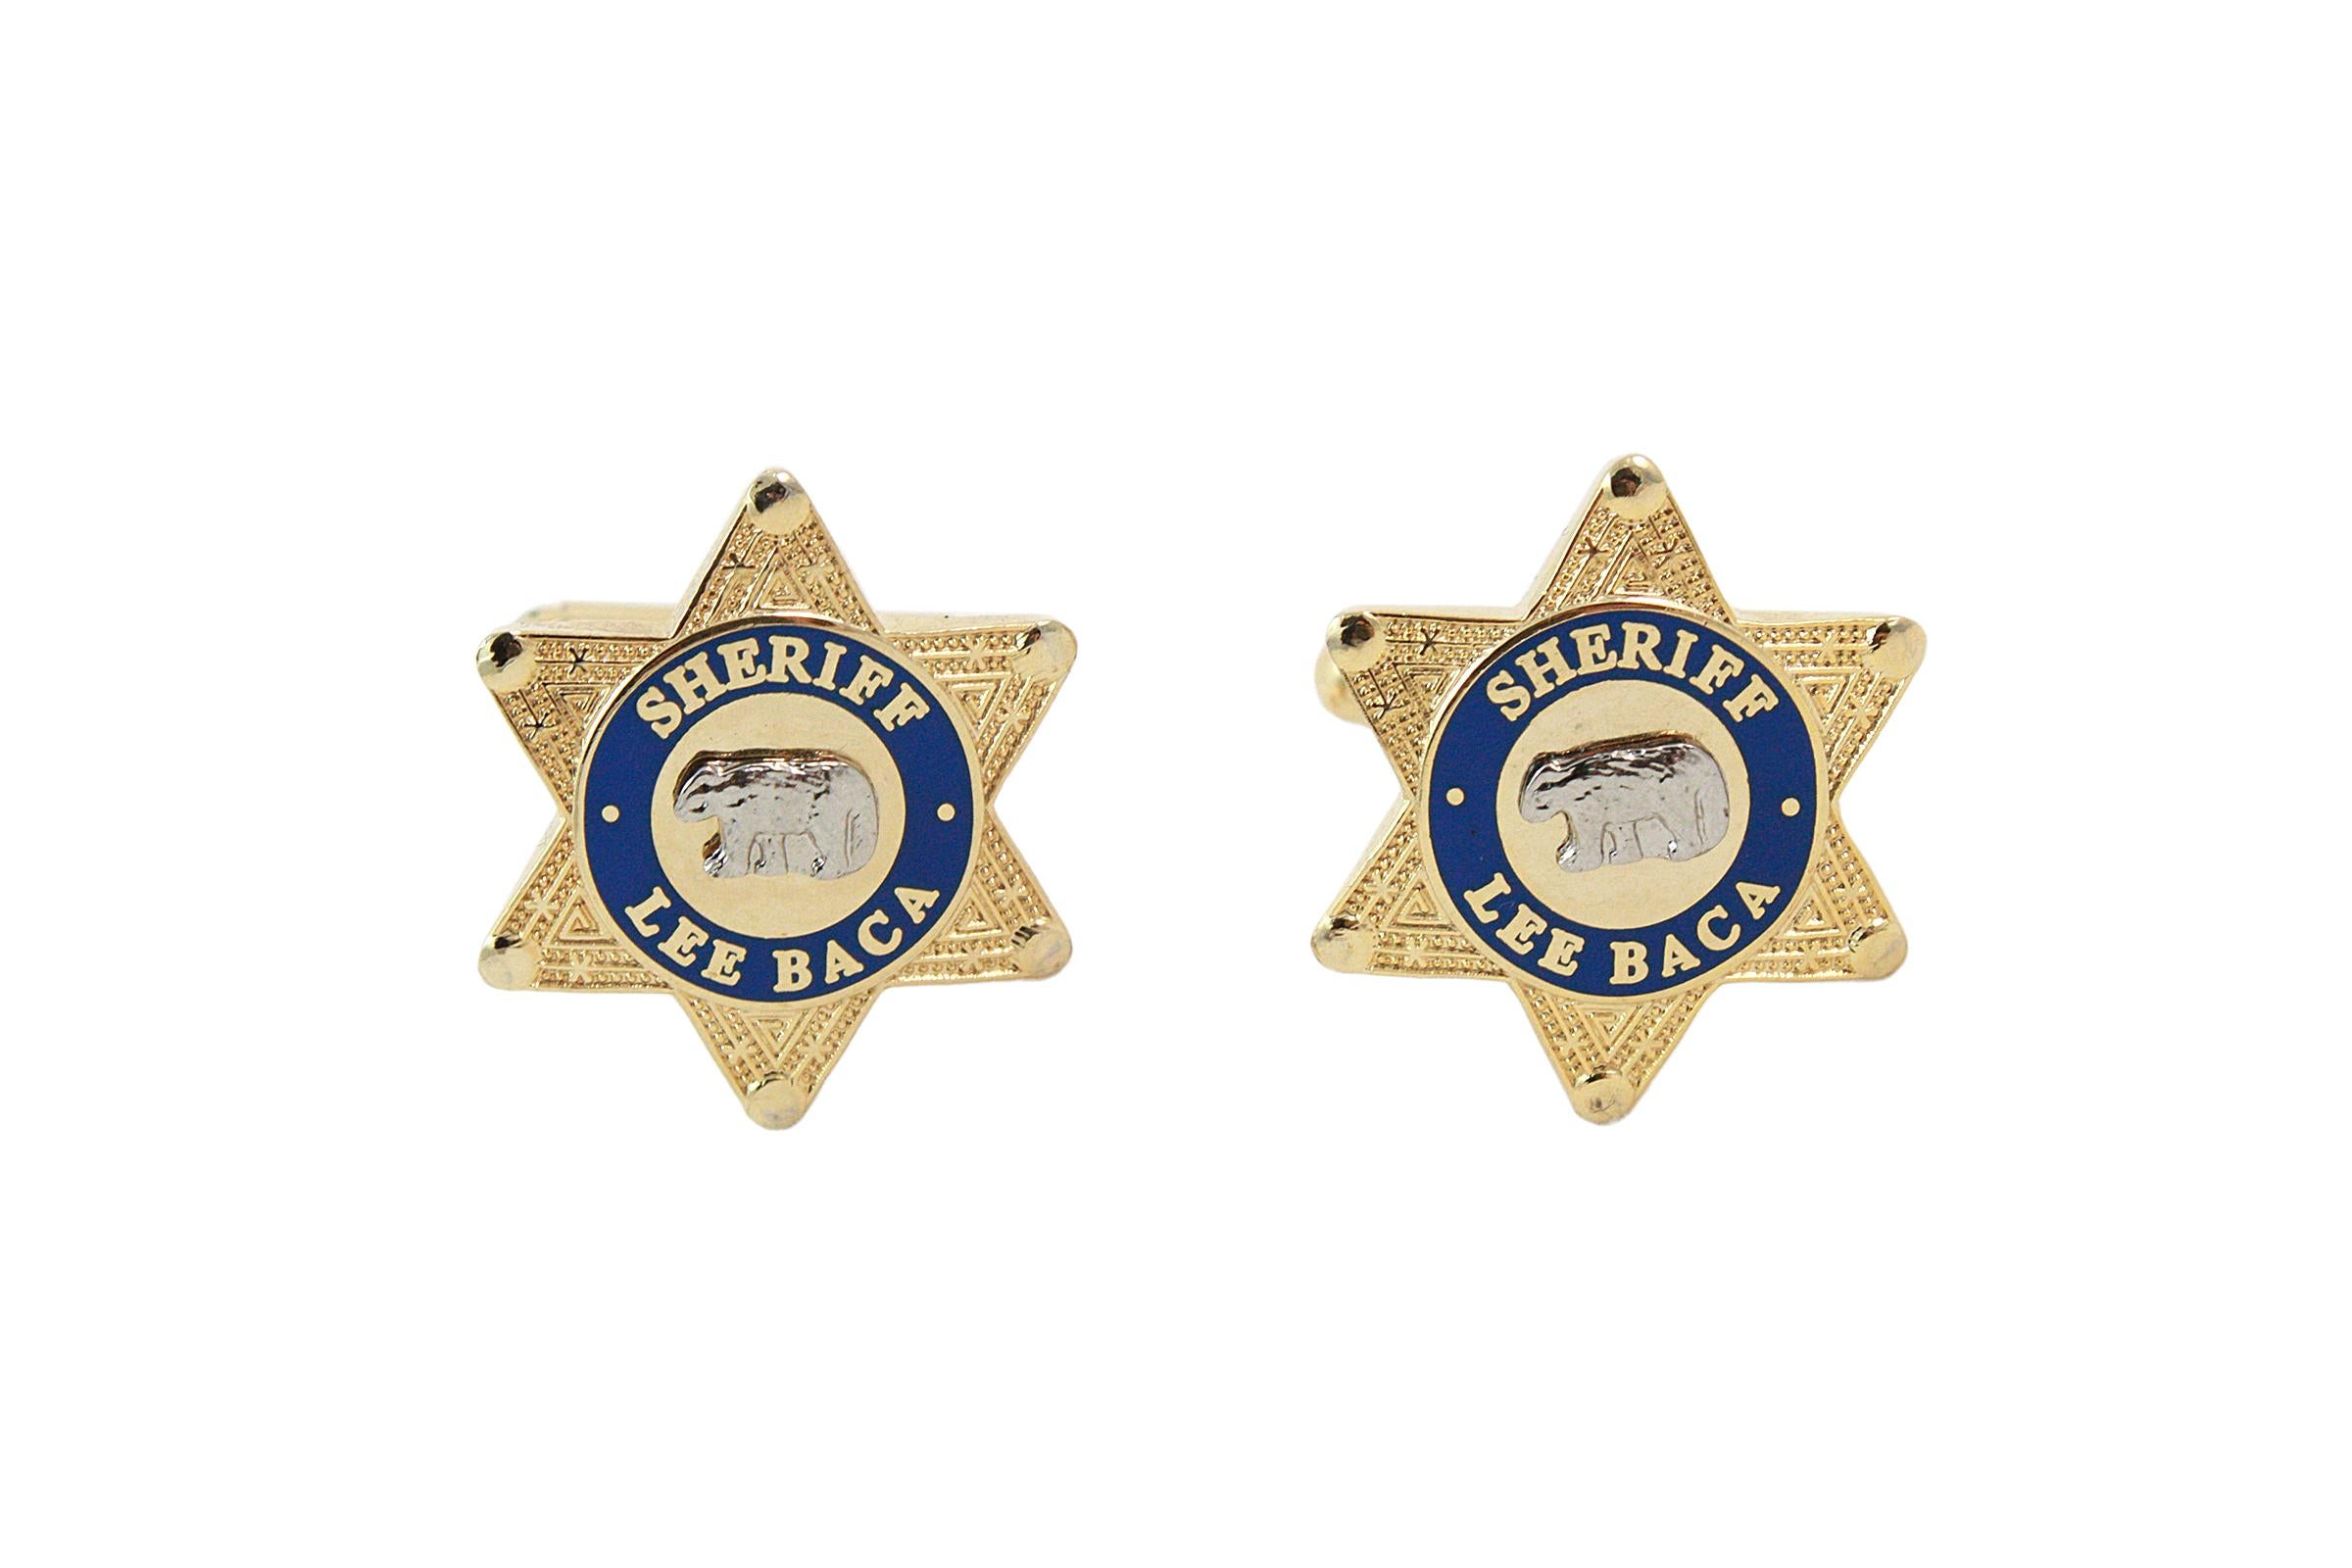 Gold tone metal star-shaped cufflinks
Sheriff Lee Baca 
Gold bear design 
Unknown designer

Sheriff Lee Baca was the acting Sheriff in Los Angeles between being sworn in in 1998 and 2016 